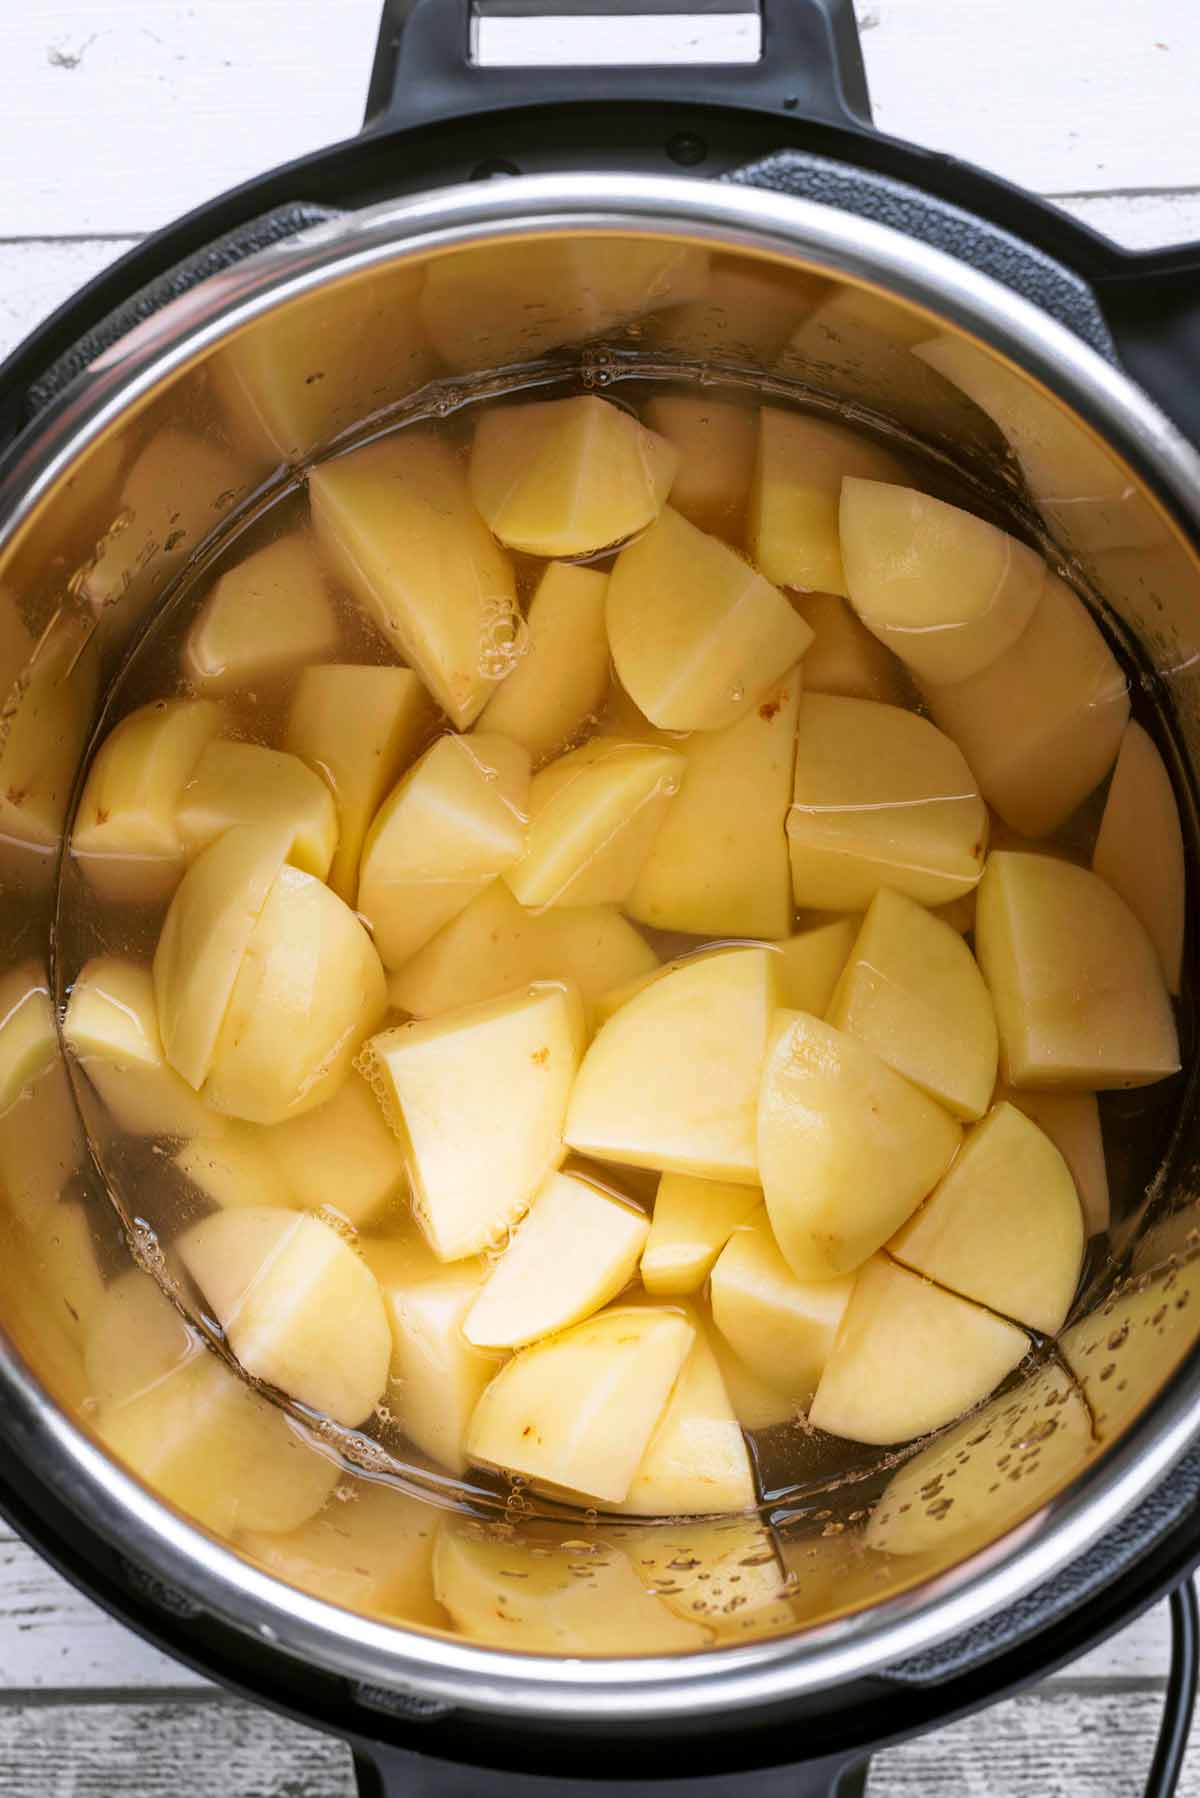 An instant pot containing peeled and chopped potatoes.